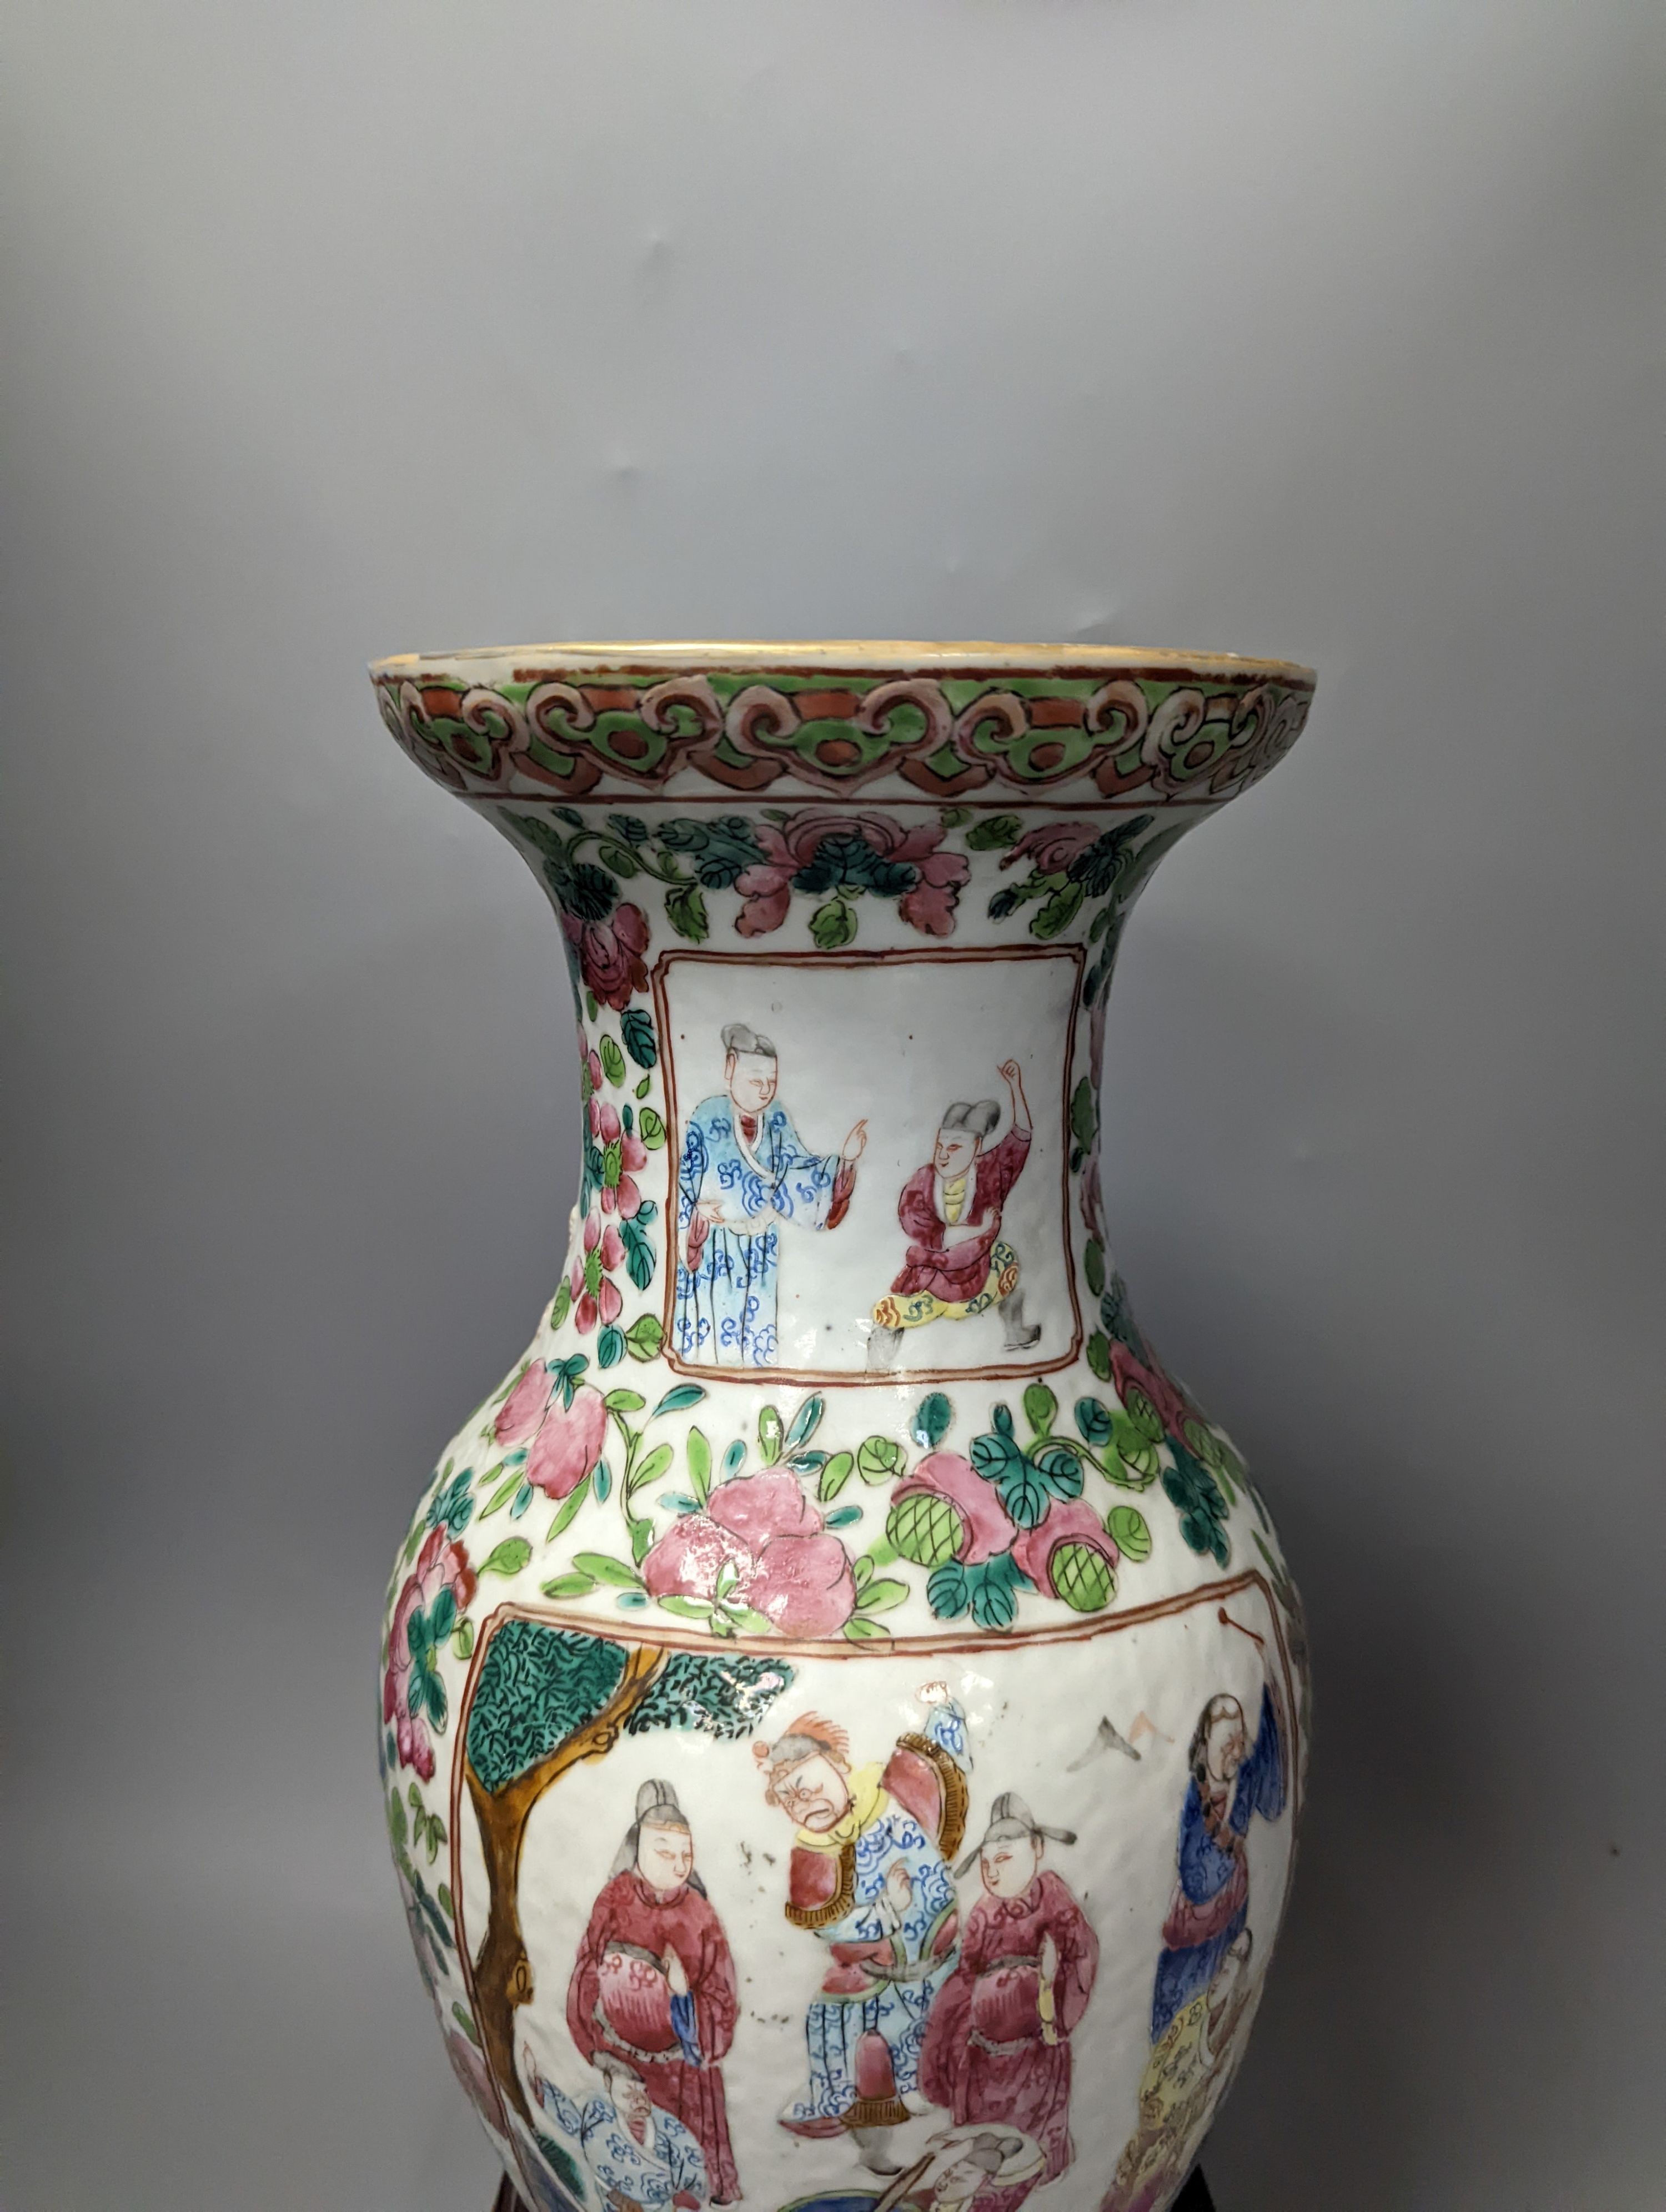 A 19th century Chinese famille rose vase on wooden stand, 37 cms high including stand.